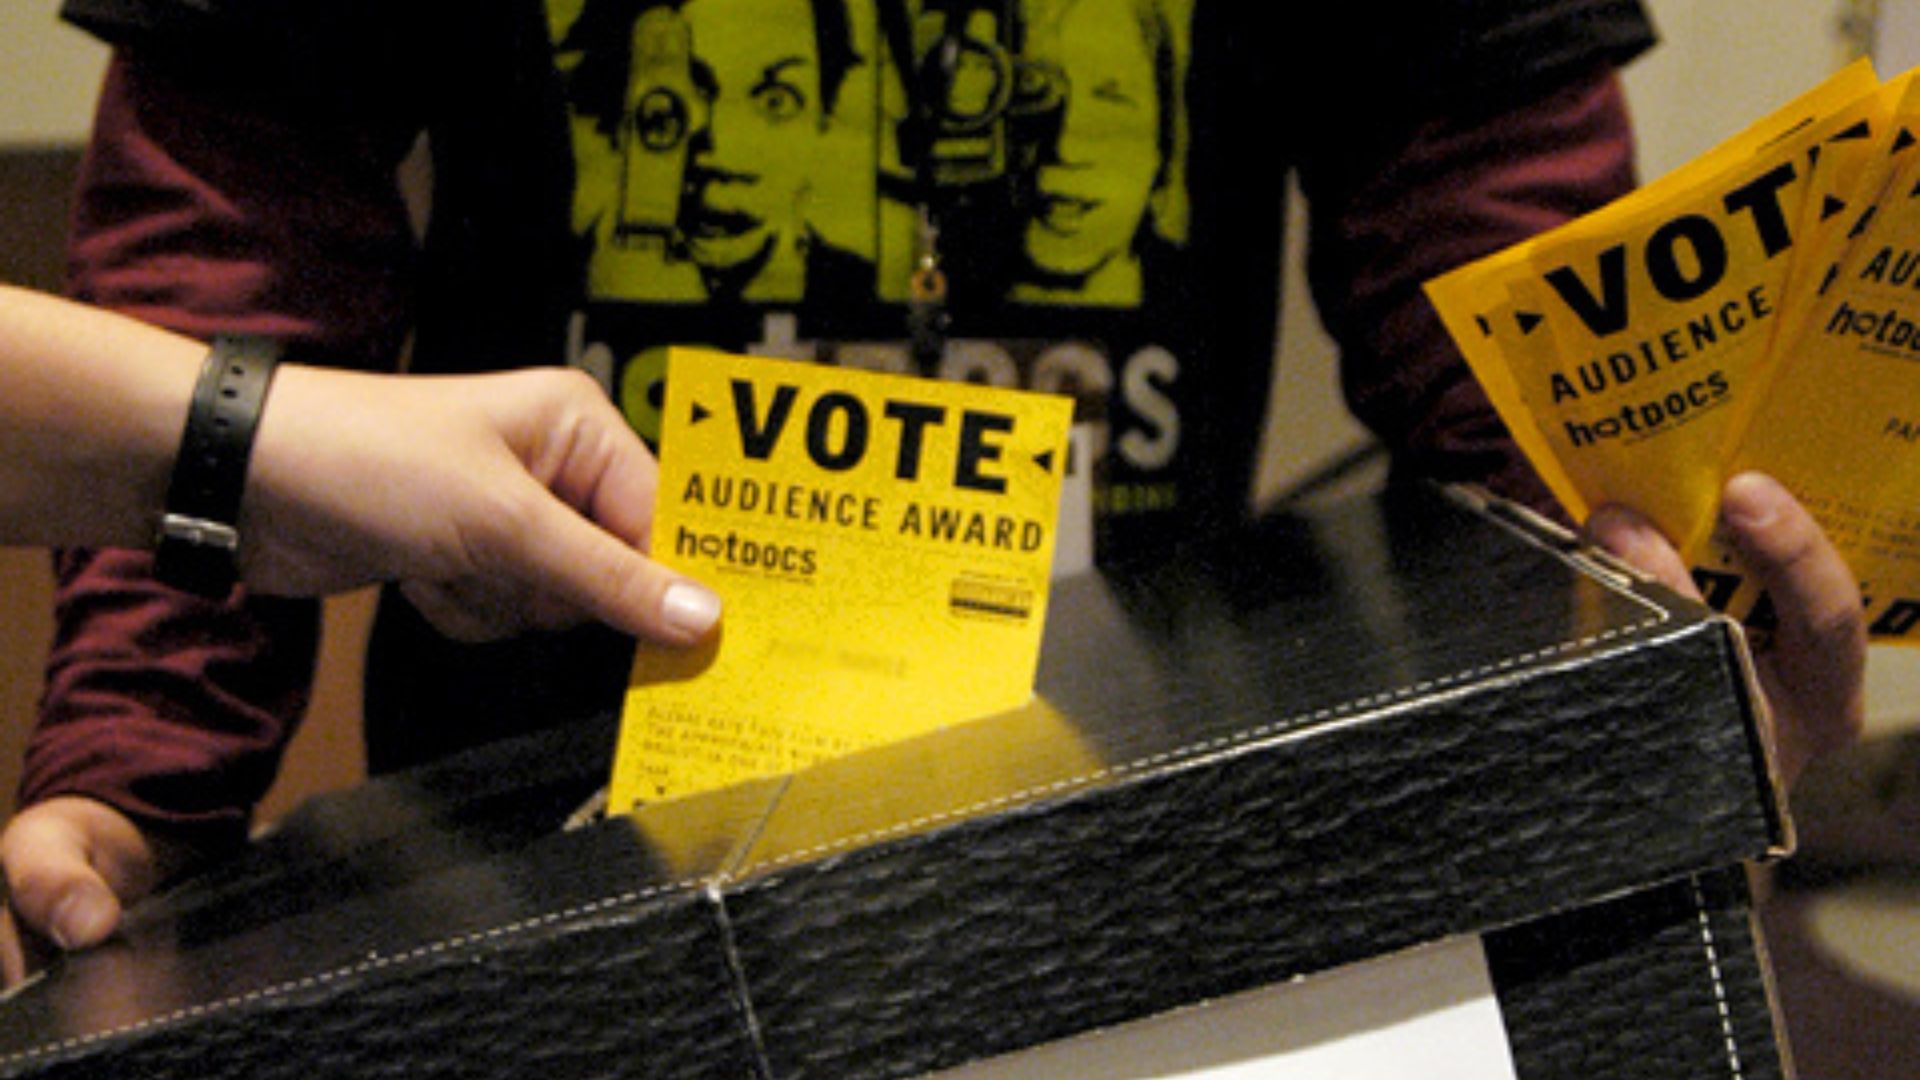 A person inserting a yellow Audience Vote card into a black ballot box.